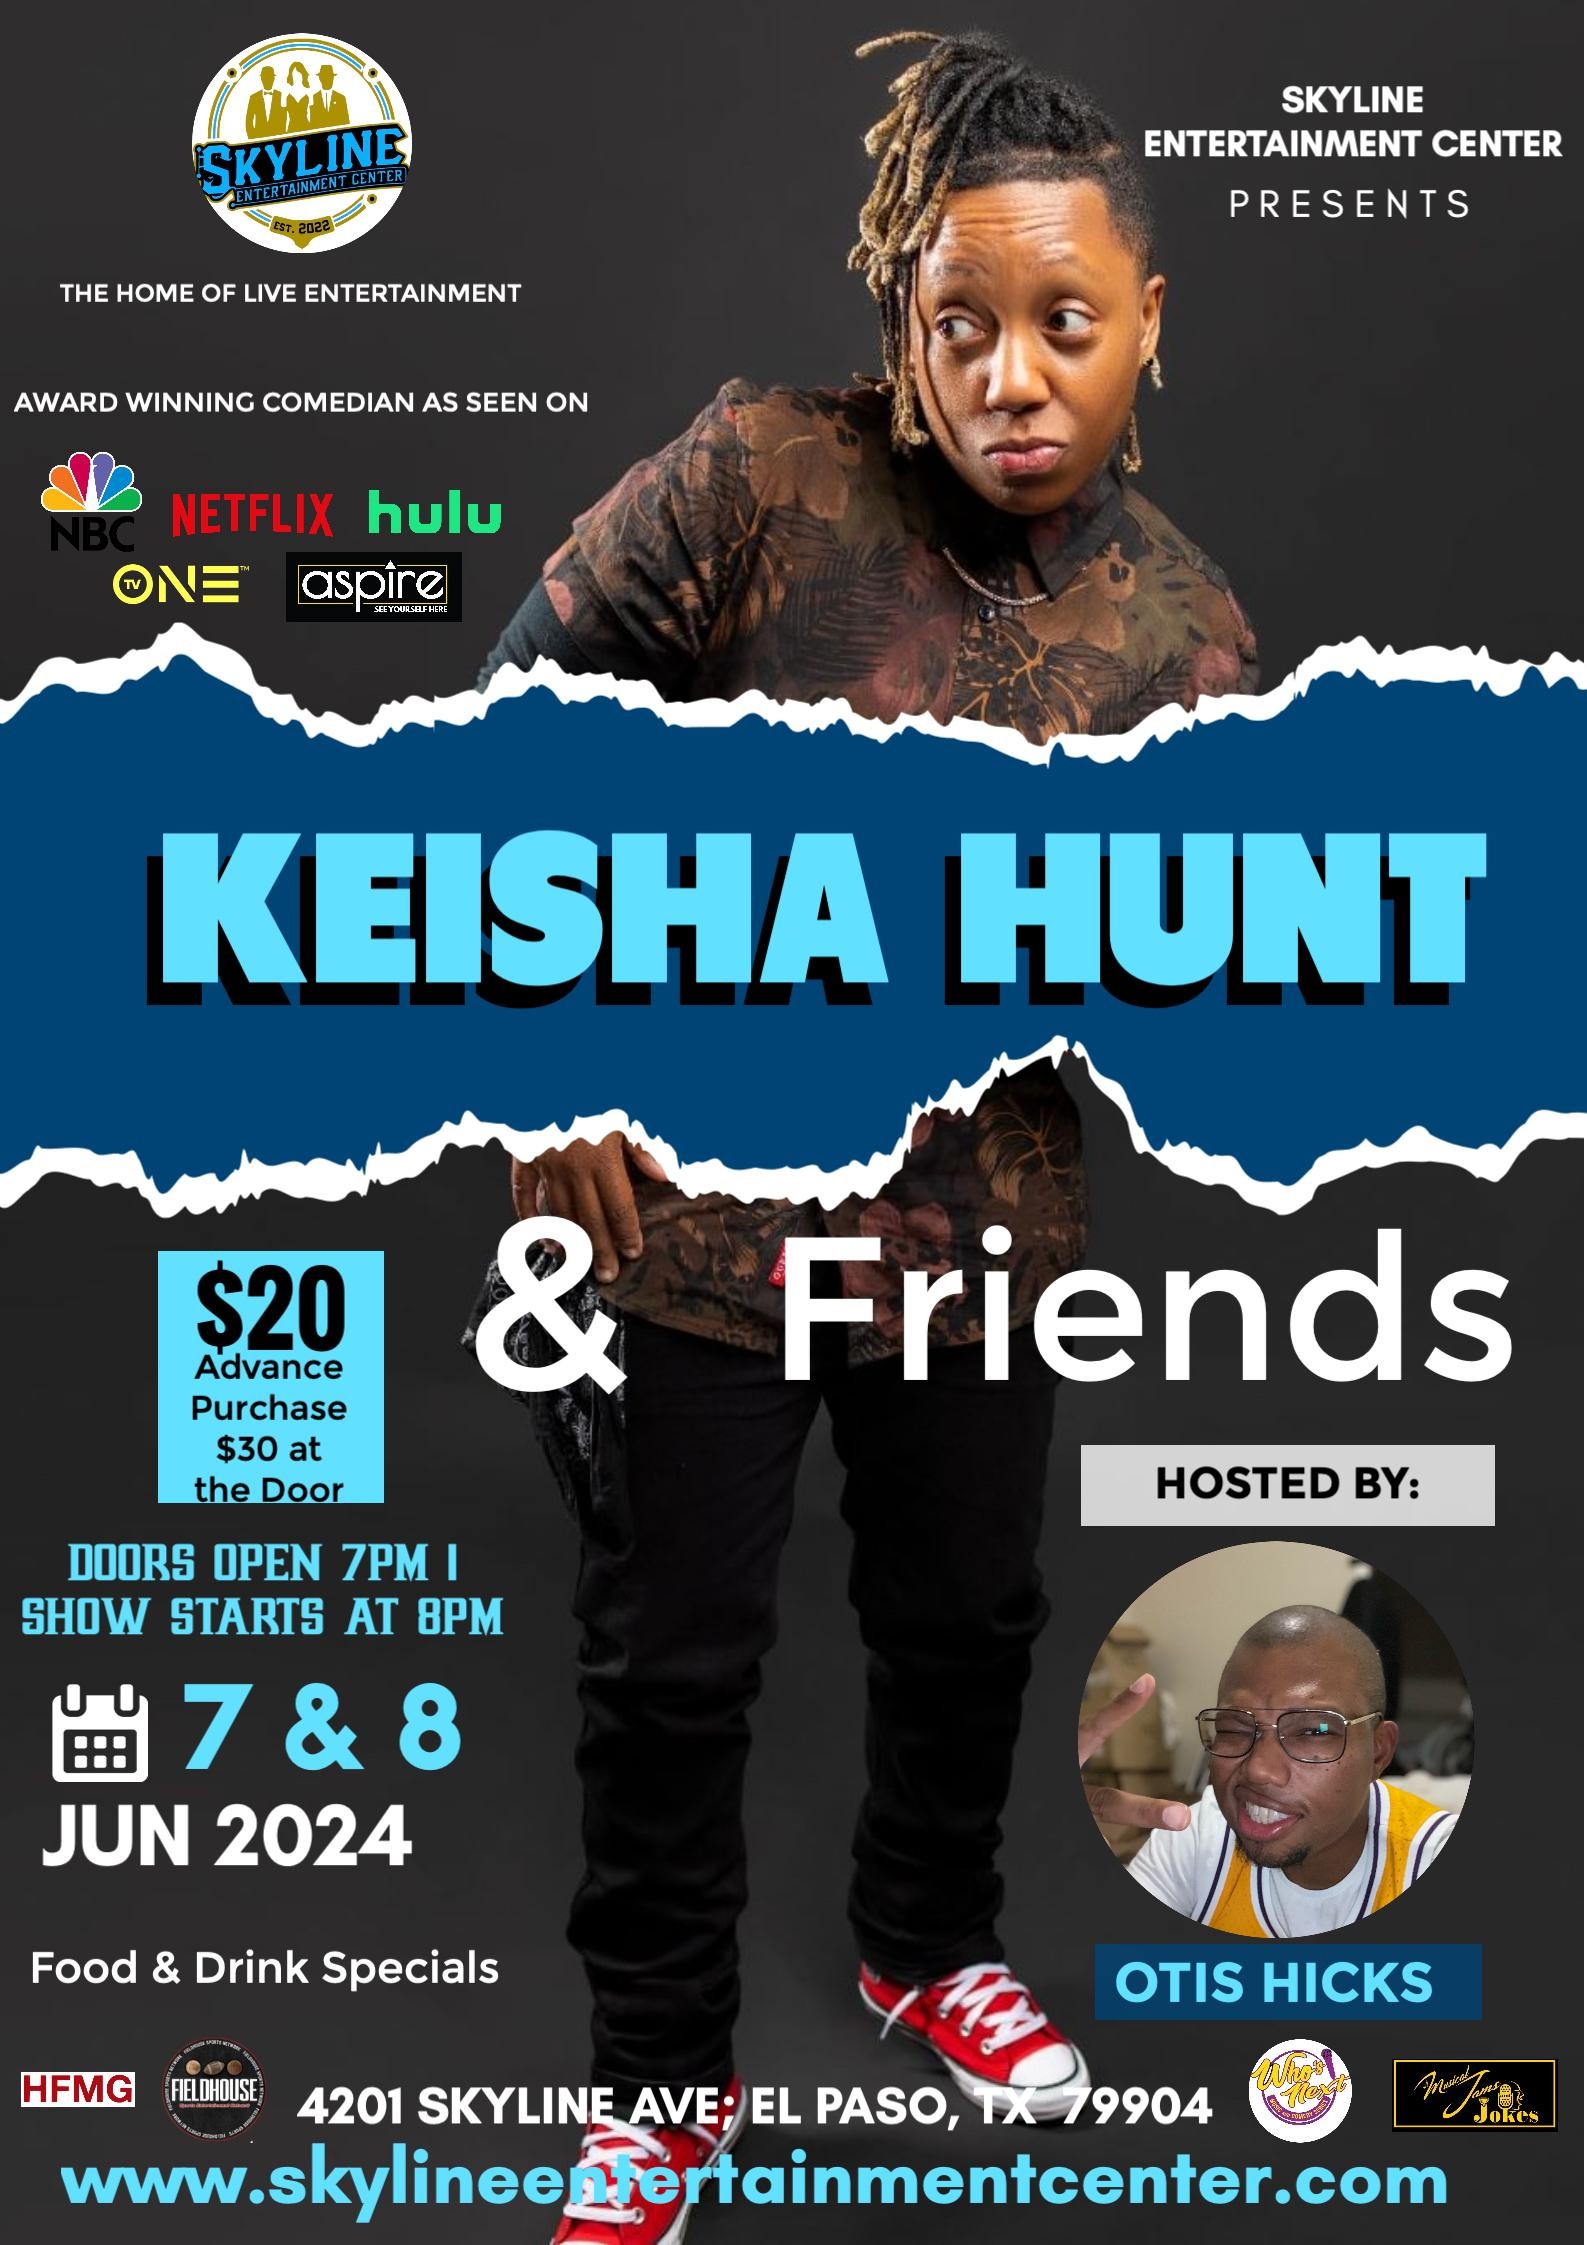 Keisha Hunt and Friends -- General Admission Ticket (June 7 Event)